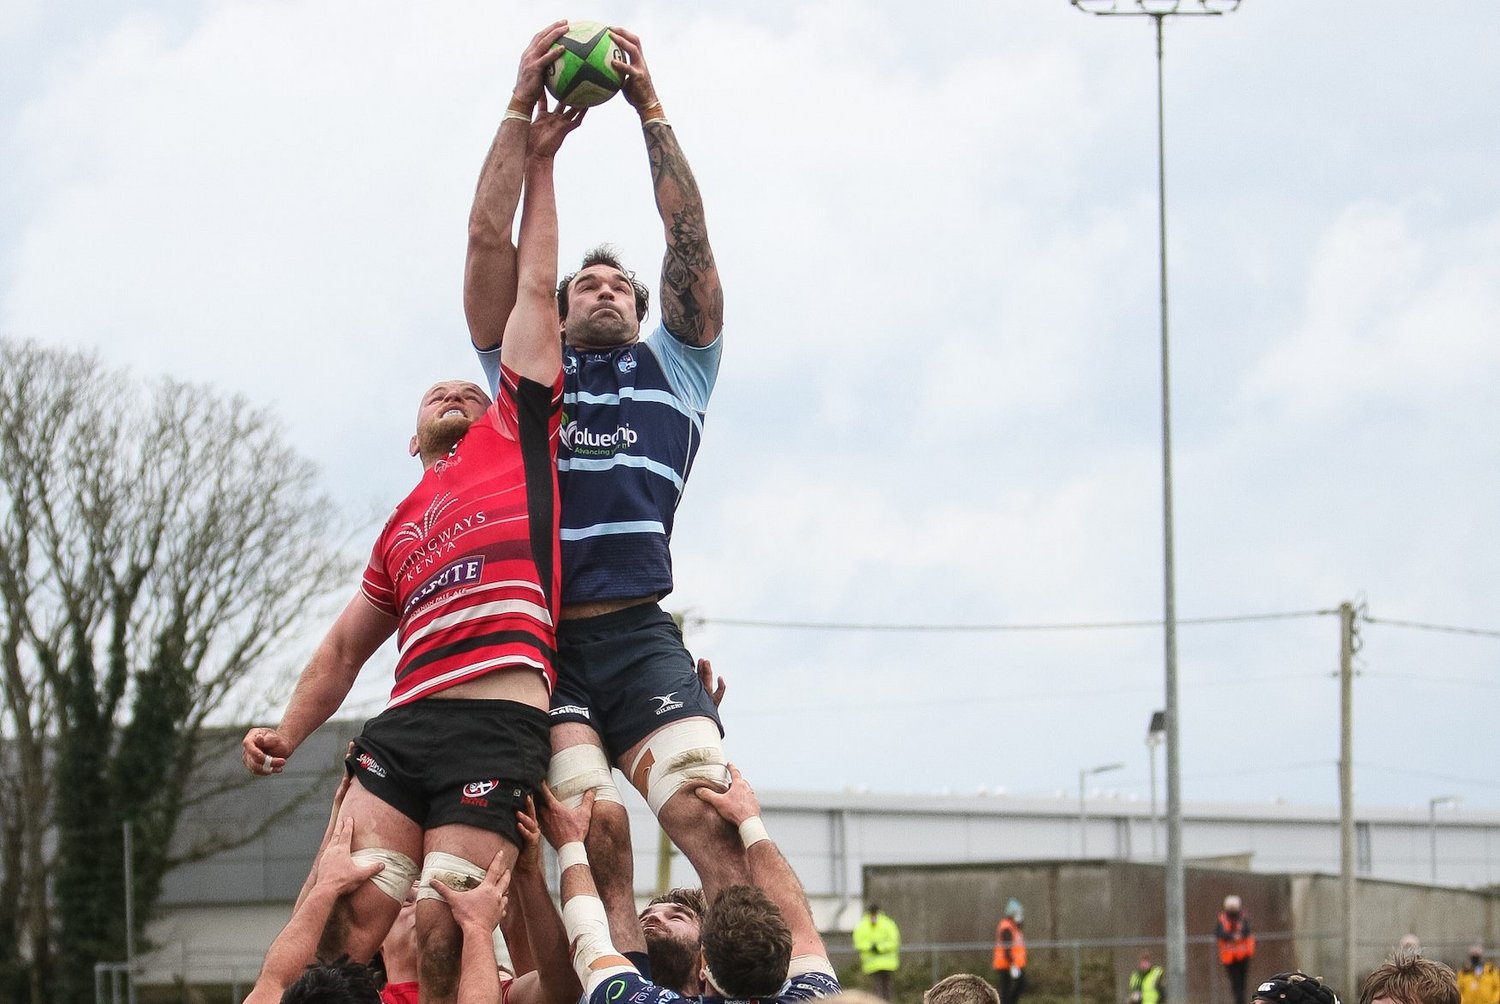 Saints' Lewis Bean rises in the lineout for Bedford Blues.